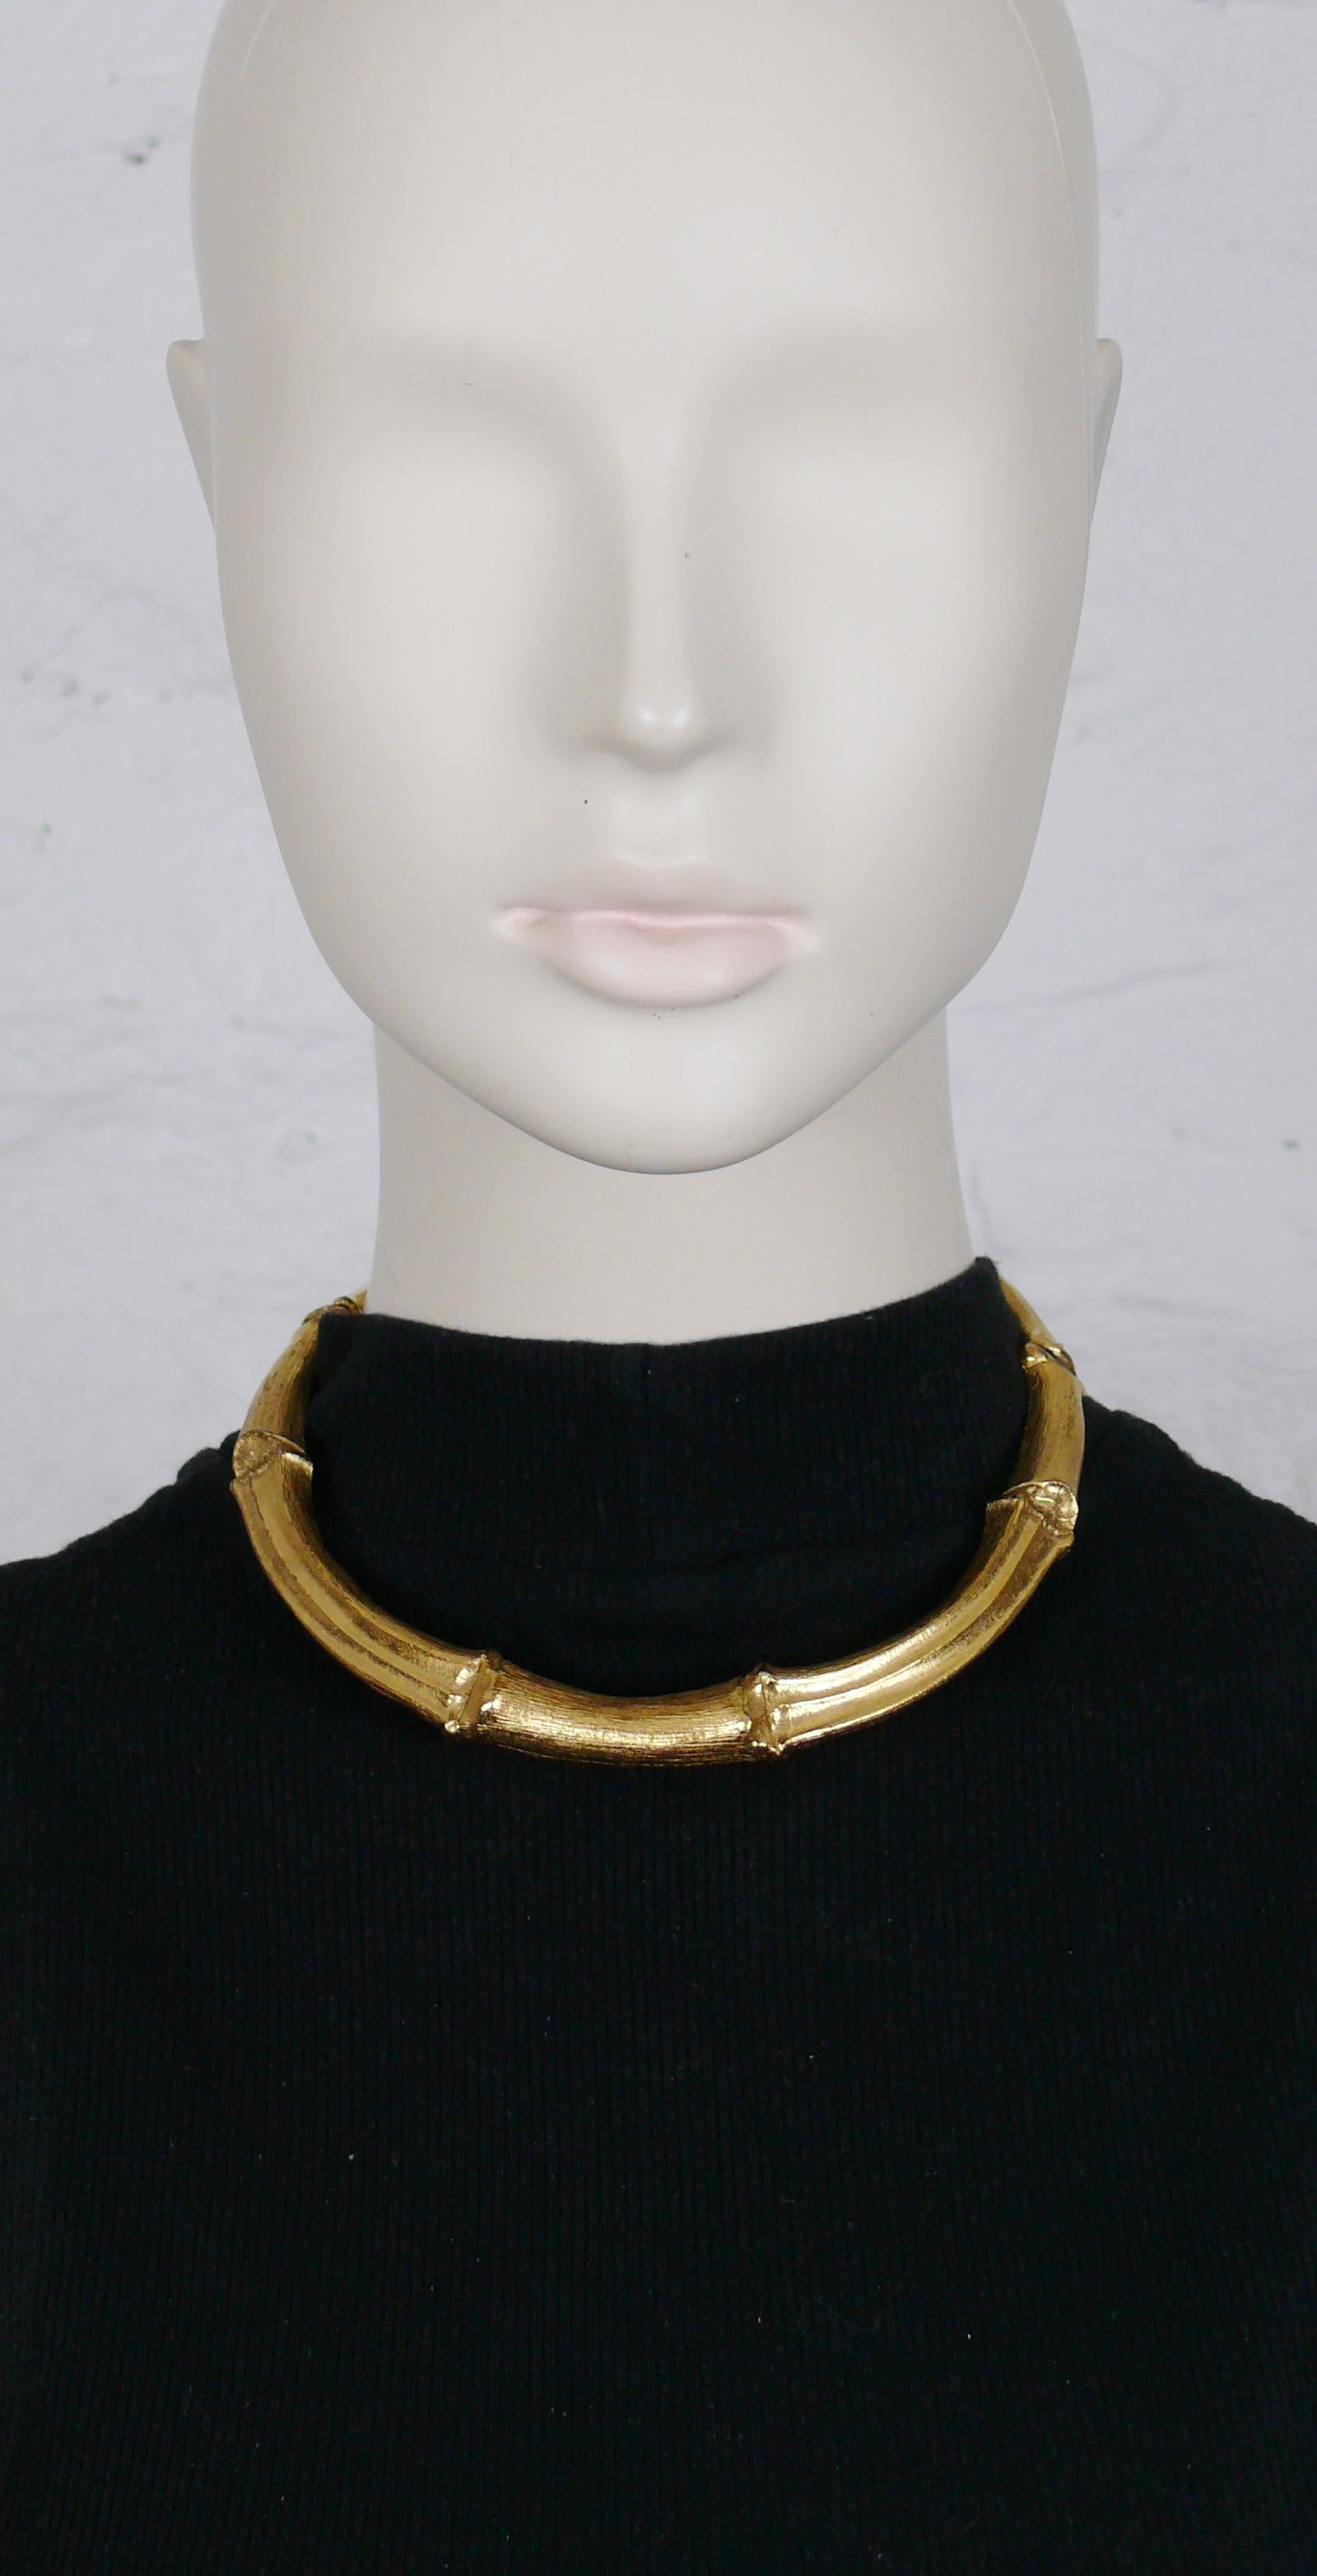 YVES SAINT LAURENT RIVE GAUCHE vintage rare gold toned bamboo design articulated collar necklace.

Bamboo design T-bar and heart toggle closure.

Embossed YVES SAINT LAURENT RIVE GAUCHE Made in France.

Indicative measurements : max. inner